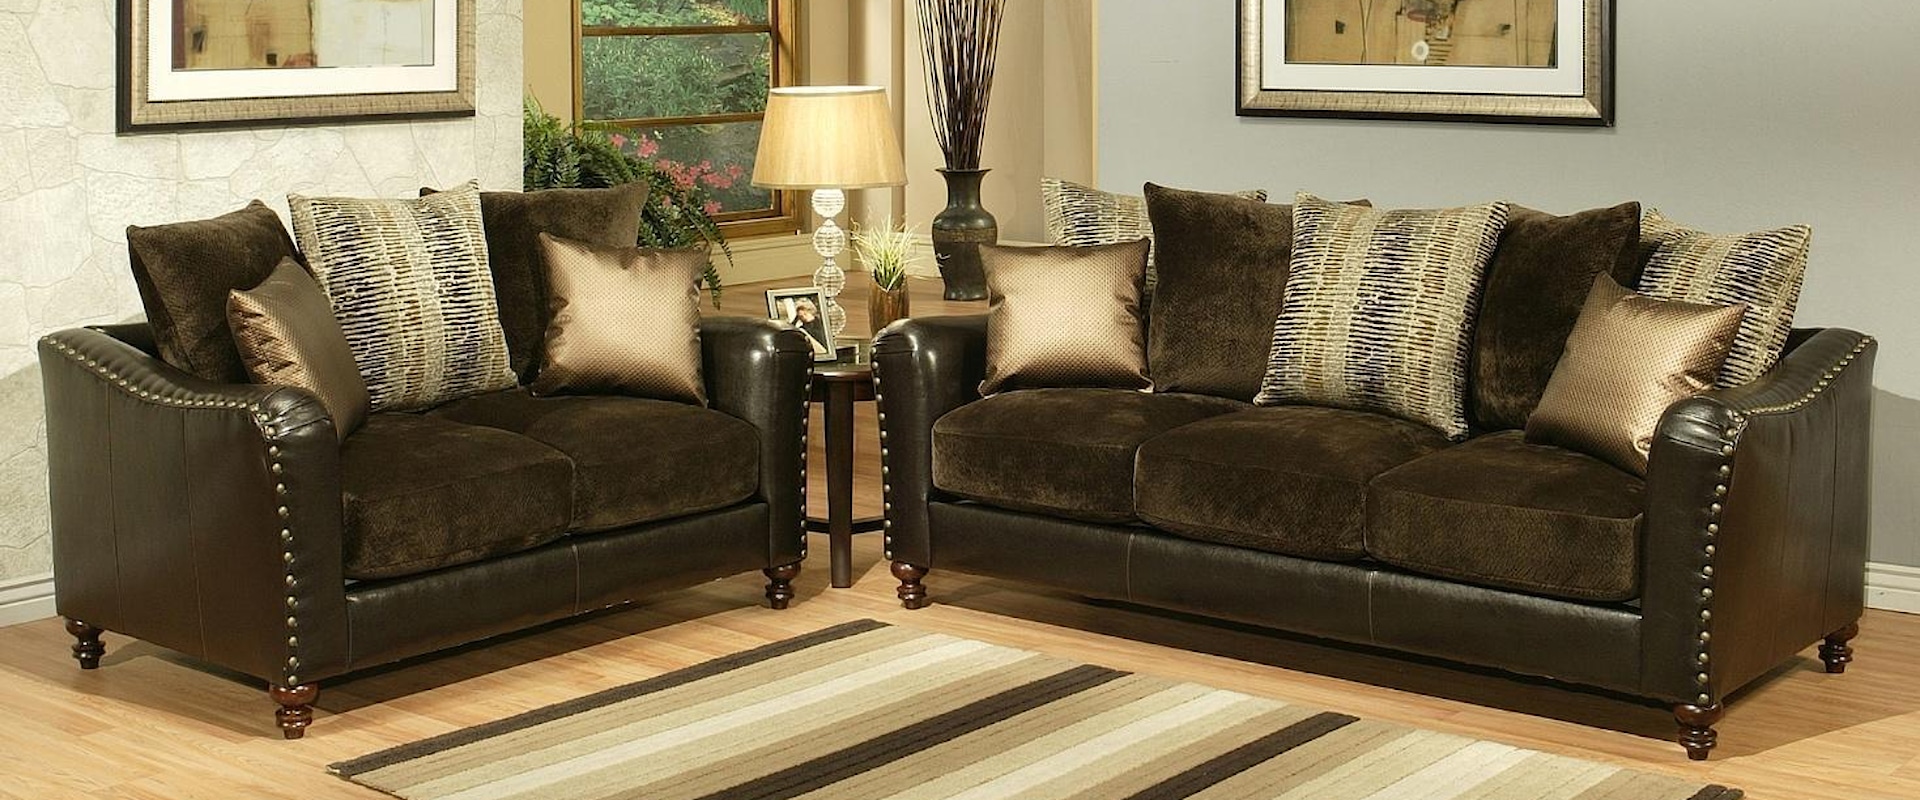 2 Piece Stationary Loveseat and Sofa Set